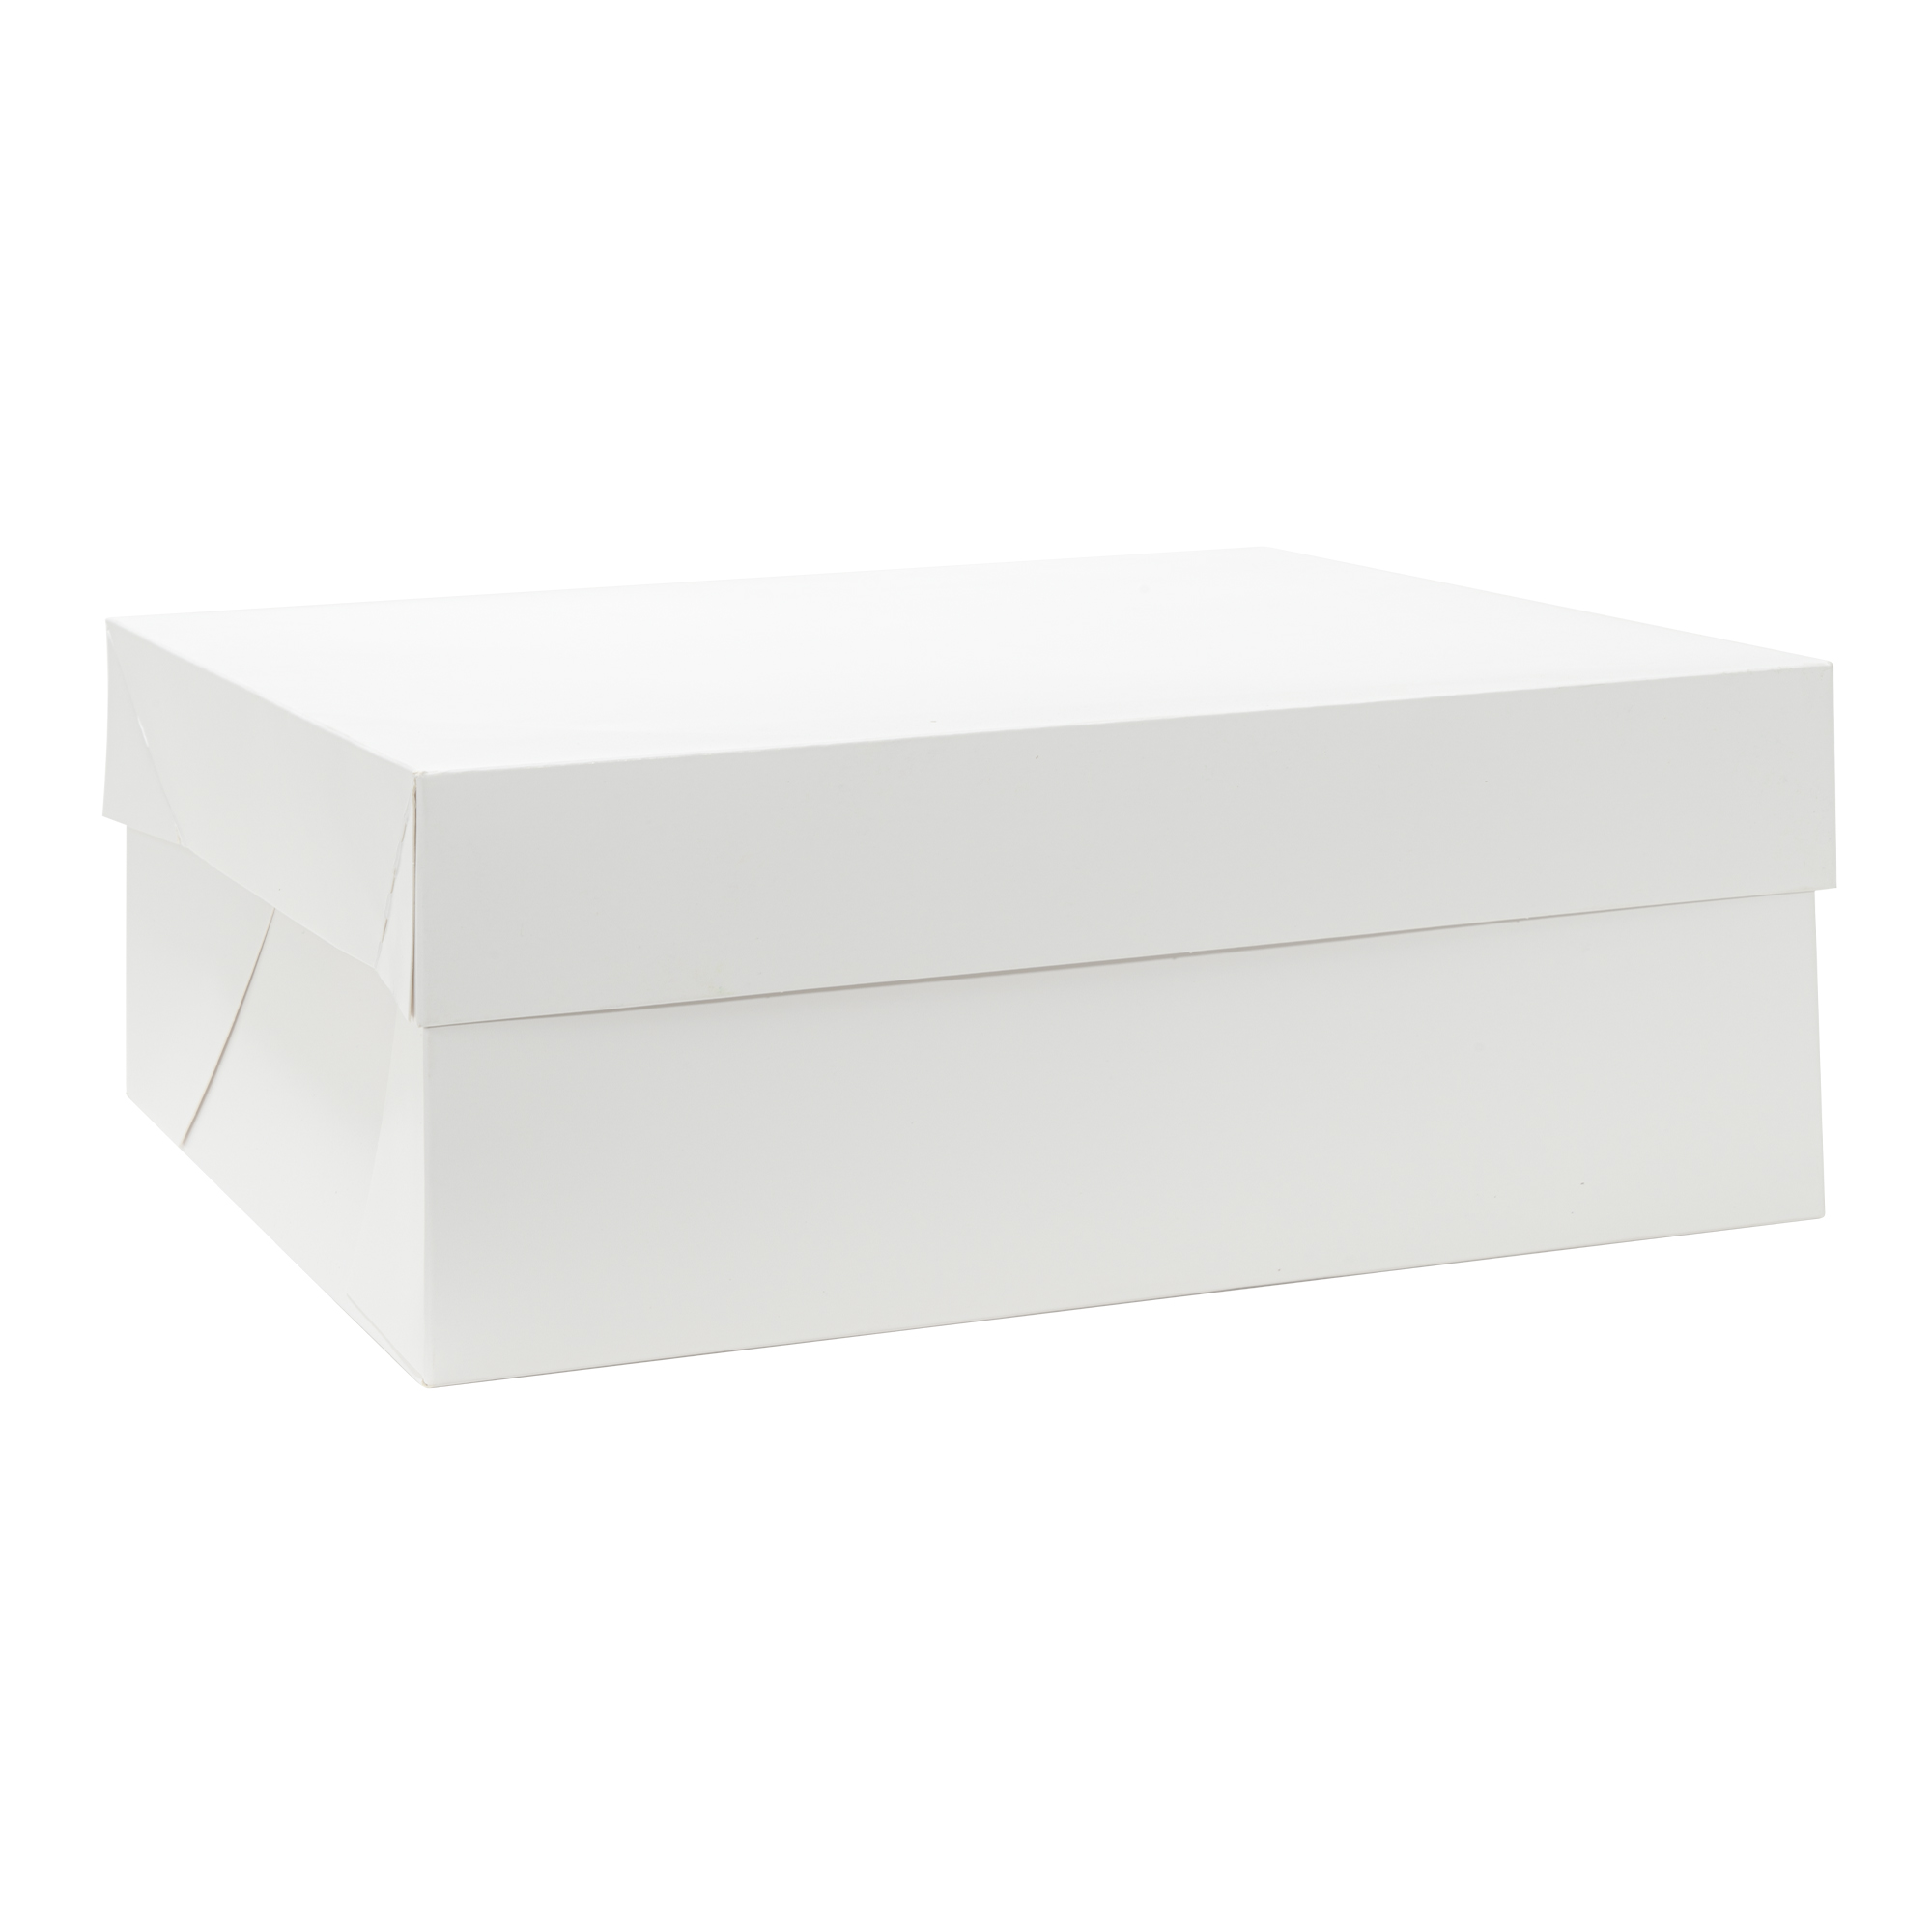 2-Piece Bakery Box With Lid 14" 25pc/pack - White